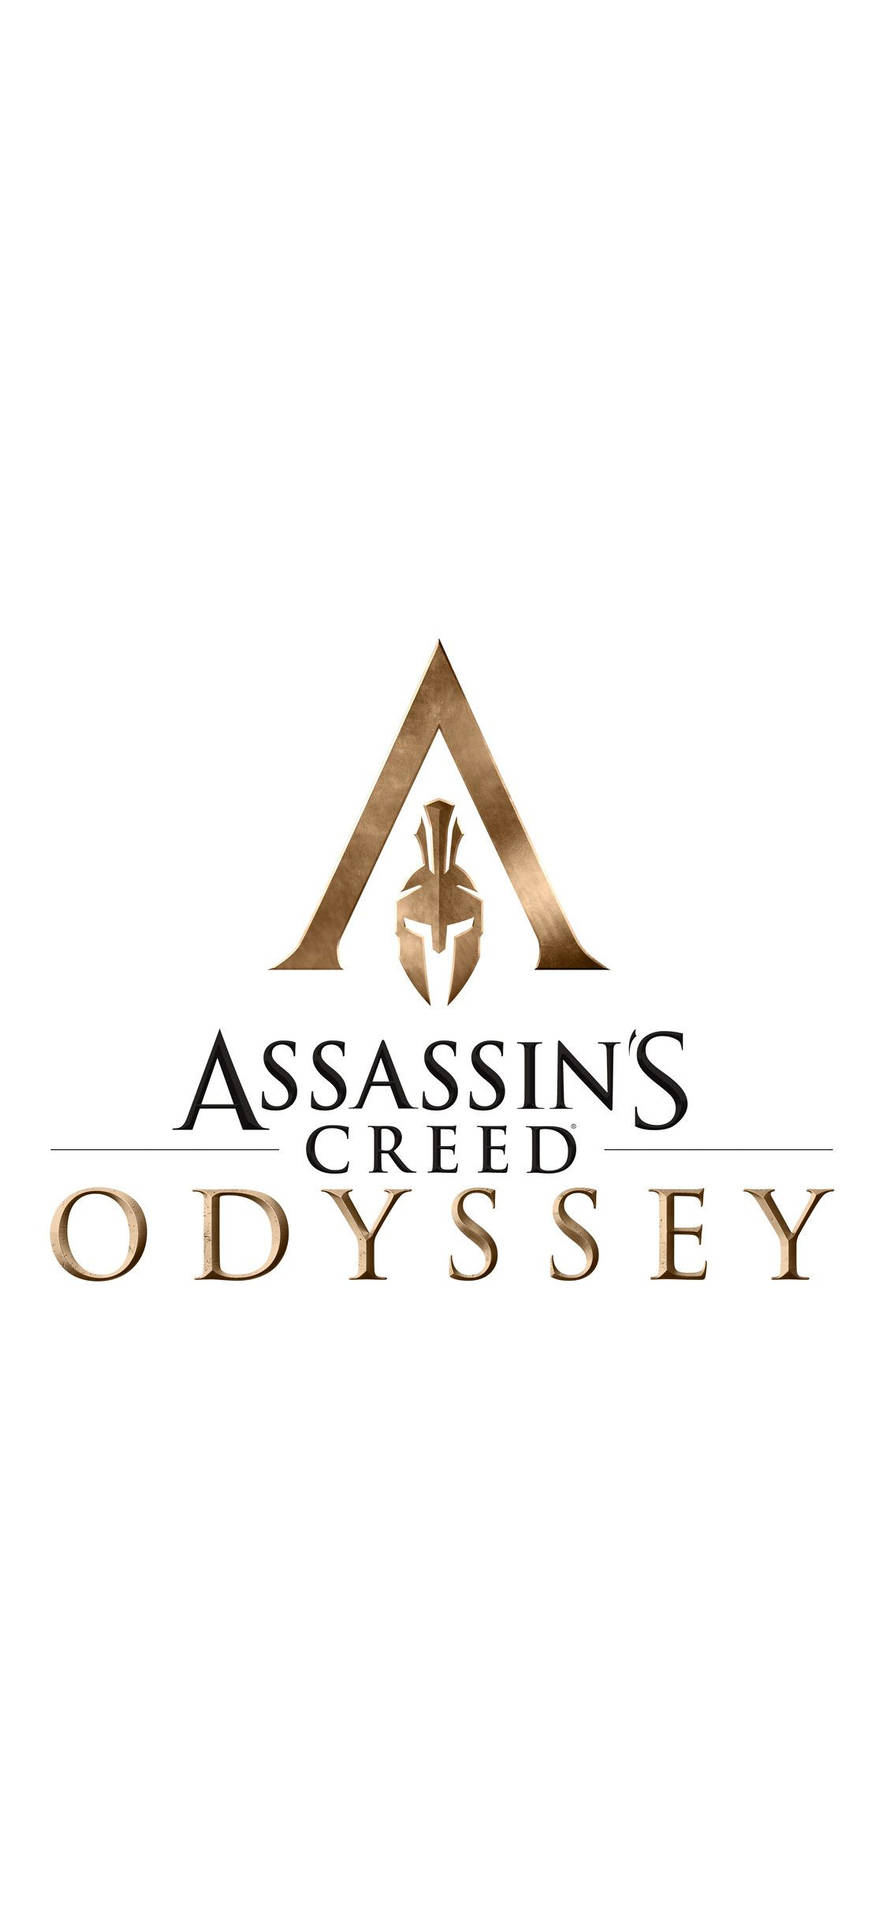 Game Logo Assassin's Creed Odyssey Iphone